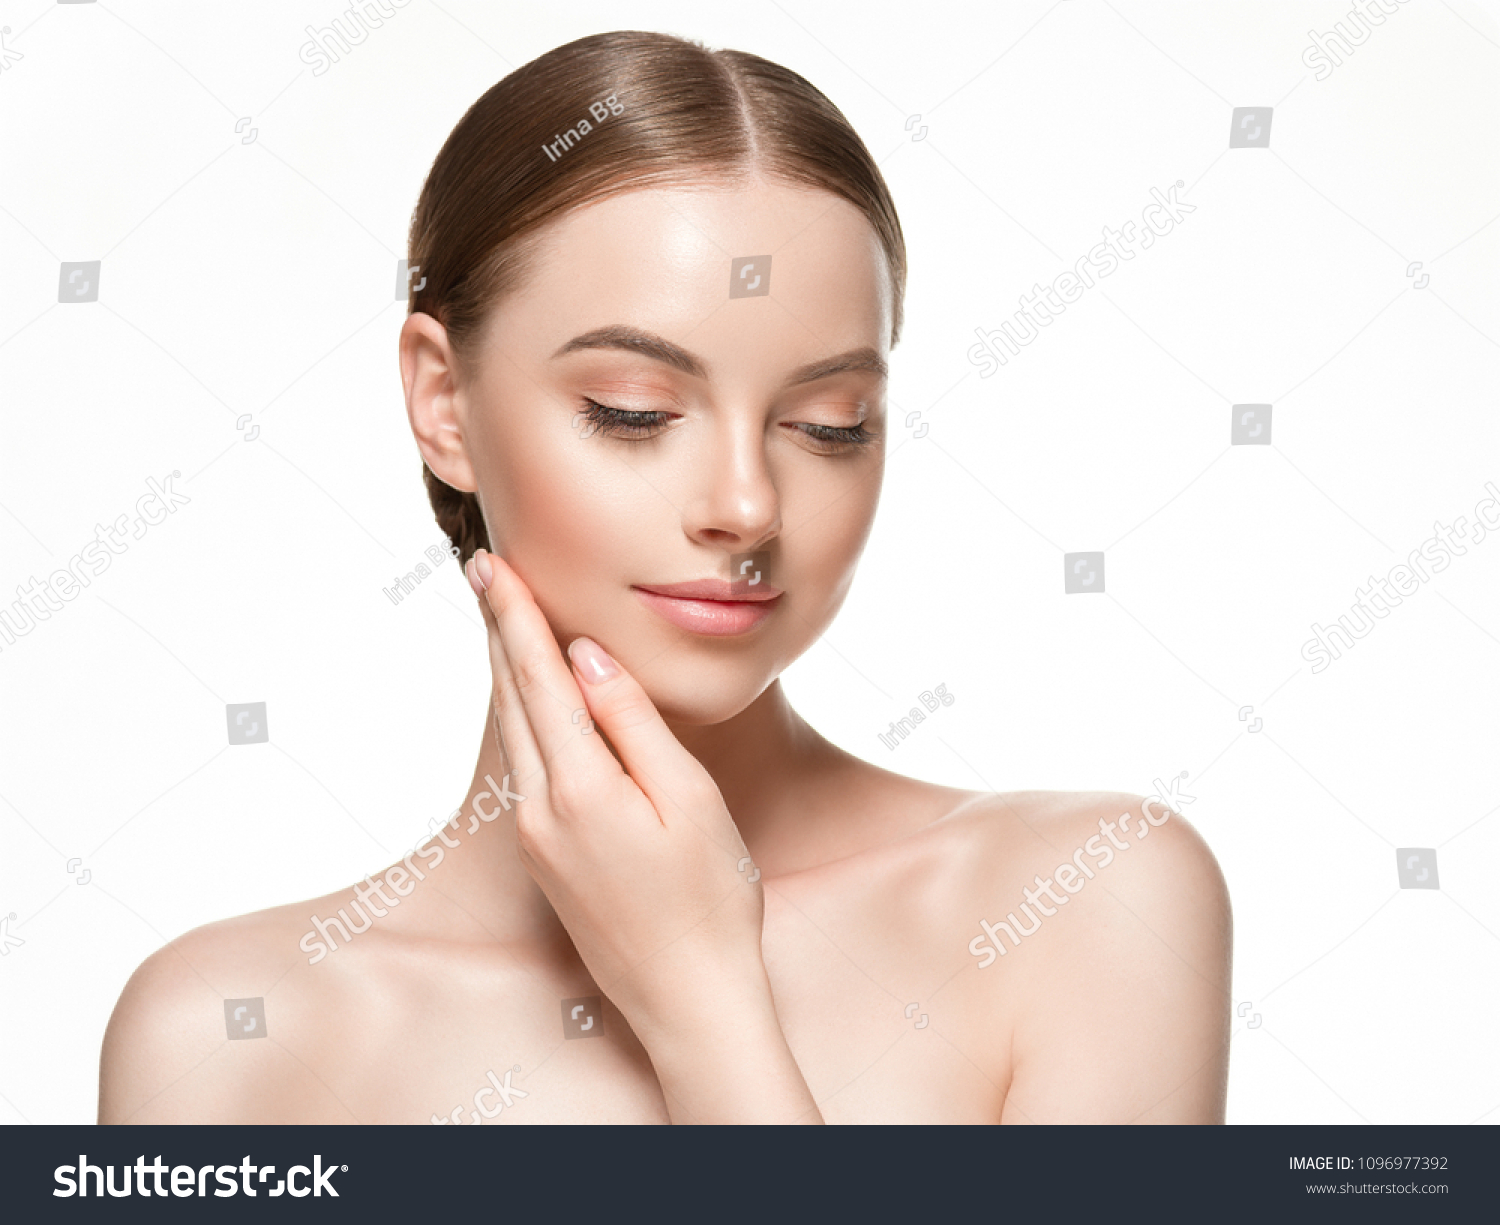 Beautiful woman female skin care healthy hair and skin close up face beauty portrait #1096977392